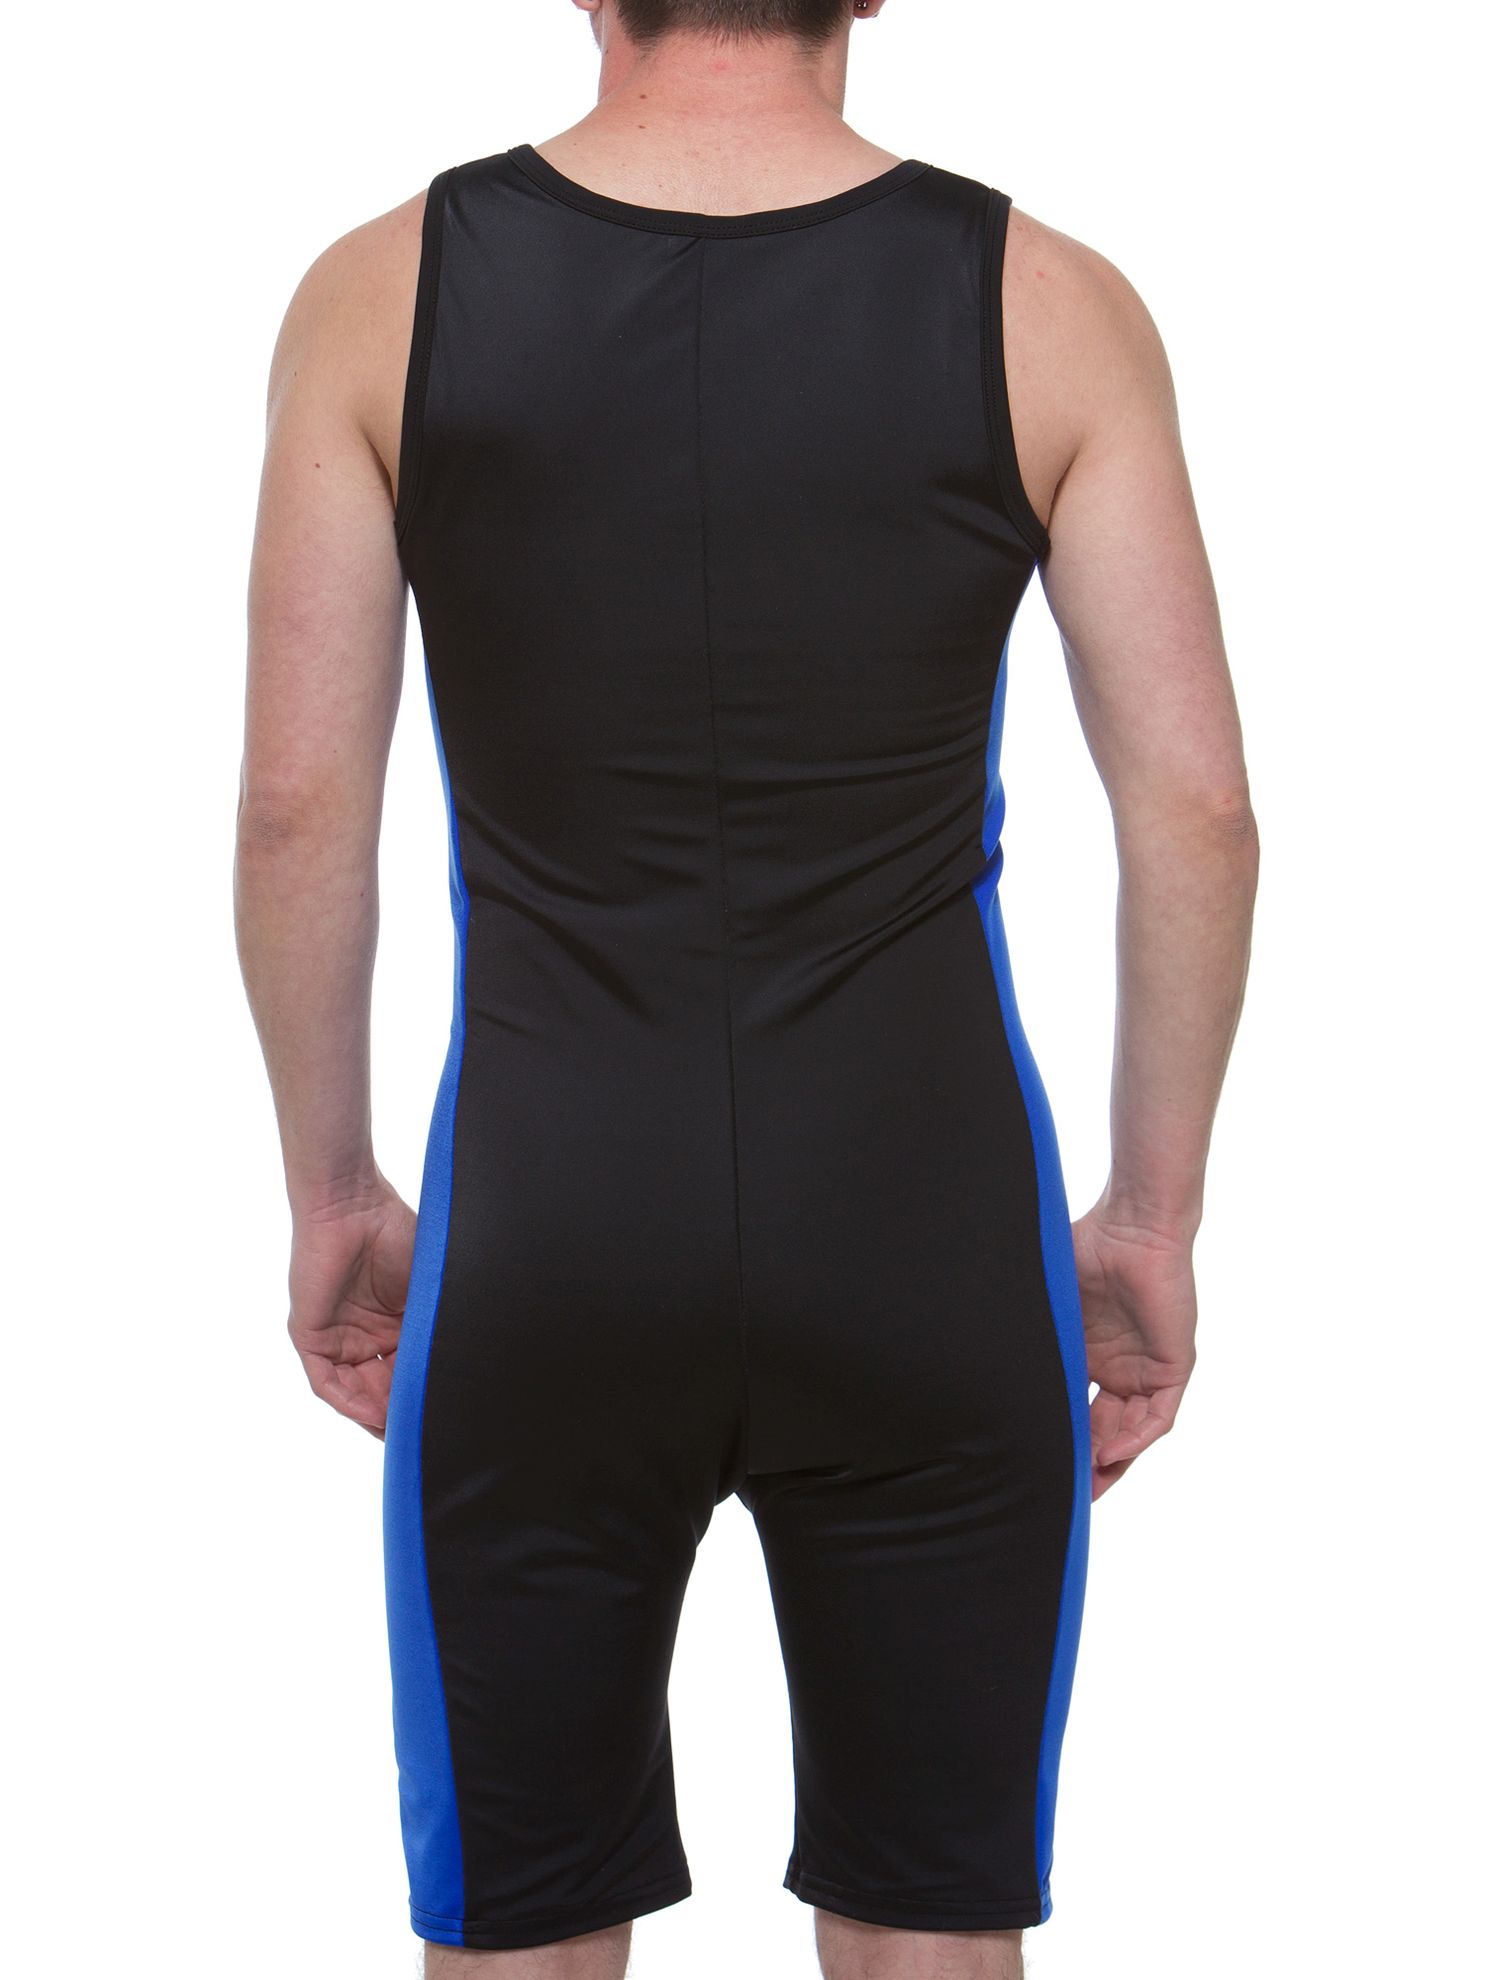 Concealer Compression Swimsuit. FTM Chest Binders for ...